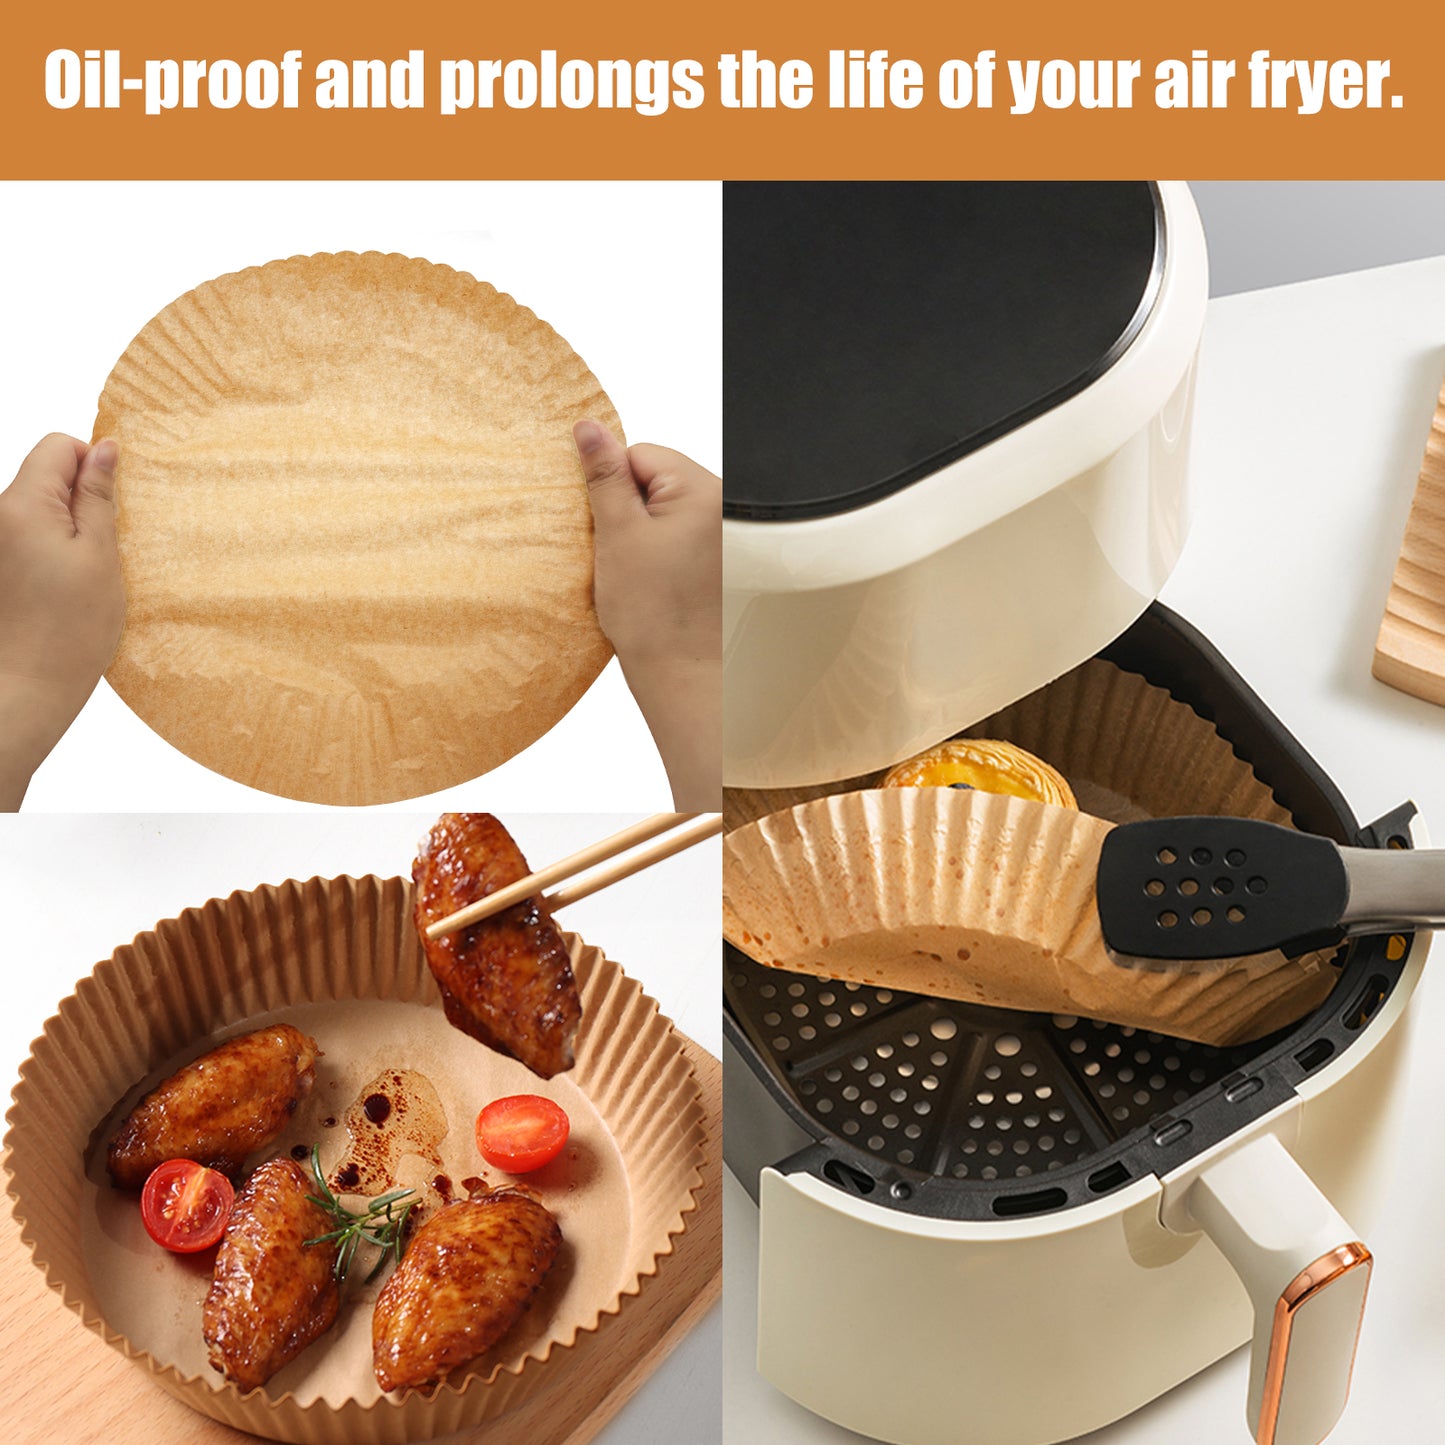 Air Fryer Disposable Paper 100 Pcs 6.3inch Round Non-Stick Prime Oil-proof Parchment Liners Cooking Paper for Fryers Basket Frying Pan Microwave Oven